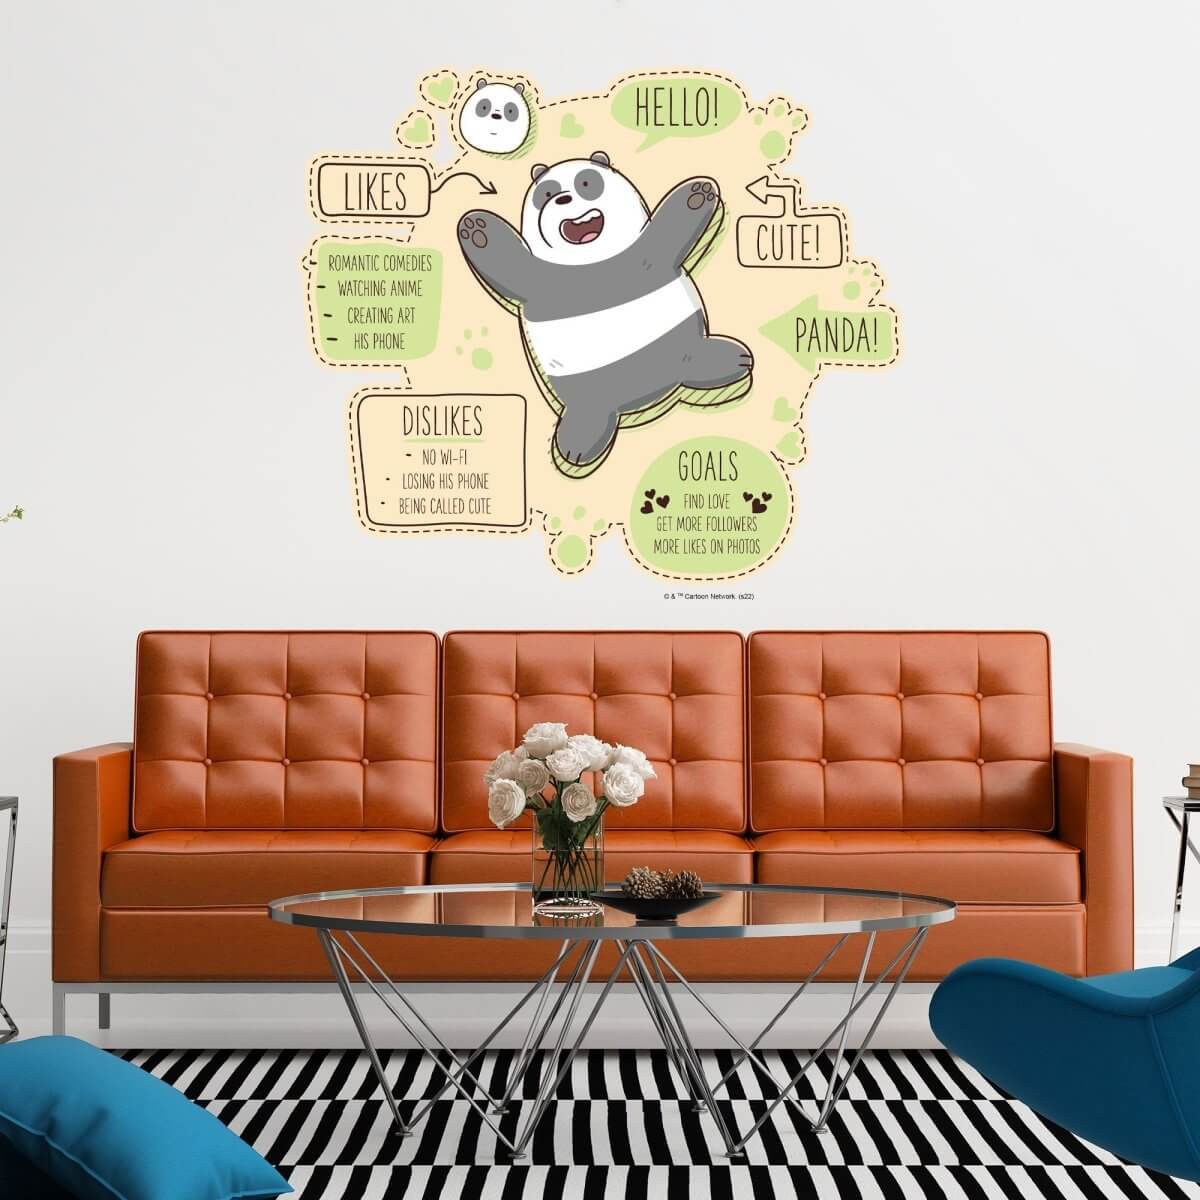 Kismet Decals Home & Room Decor We Bare Bears Panda 101 Wall decal sticker - officially licensed - latex printed with no solvent odor - Kismet Decals